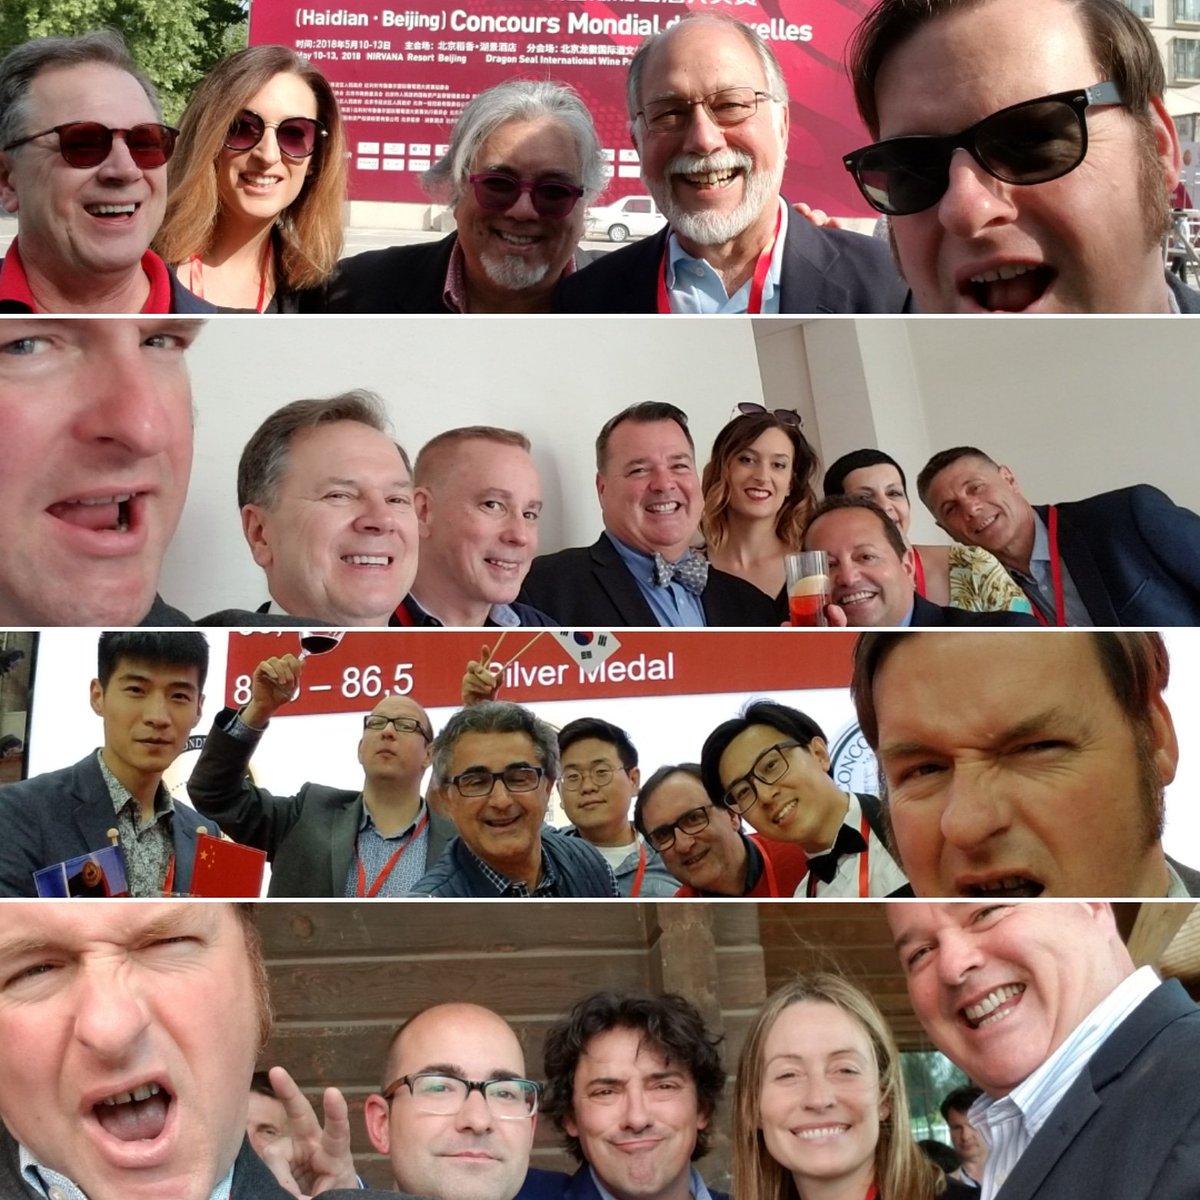 In #Beijing, China: spreading love and respect for my fellow #wine judges at the 25th annual  #ConcoursMondial #winecompetition, one #SawyerSelfie at a time! #CMB2018 #ConcoursMondialdeBruxelles #CharlieWine #SawyerSomm #letsdothis